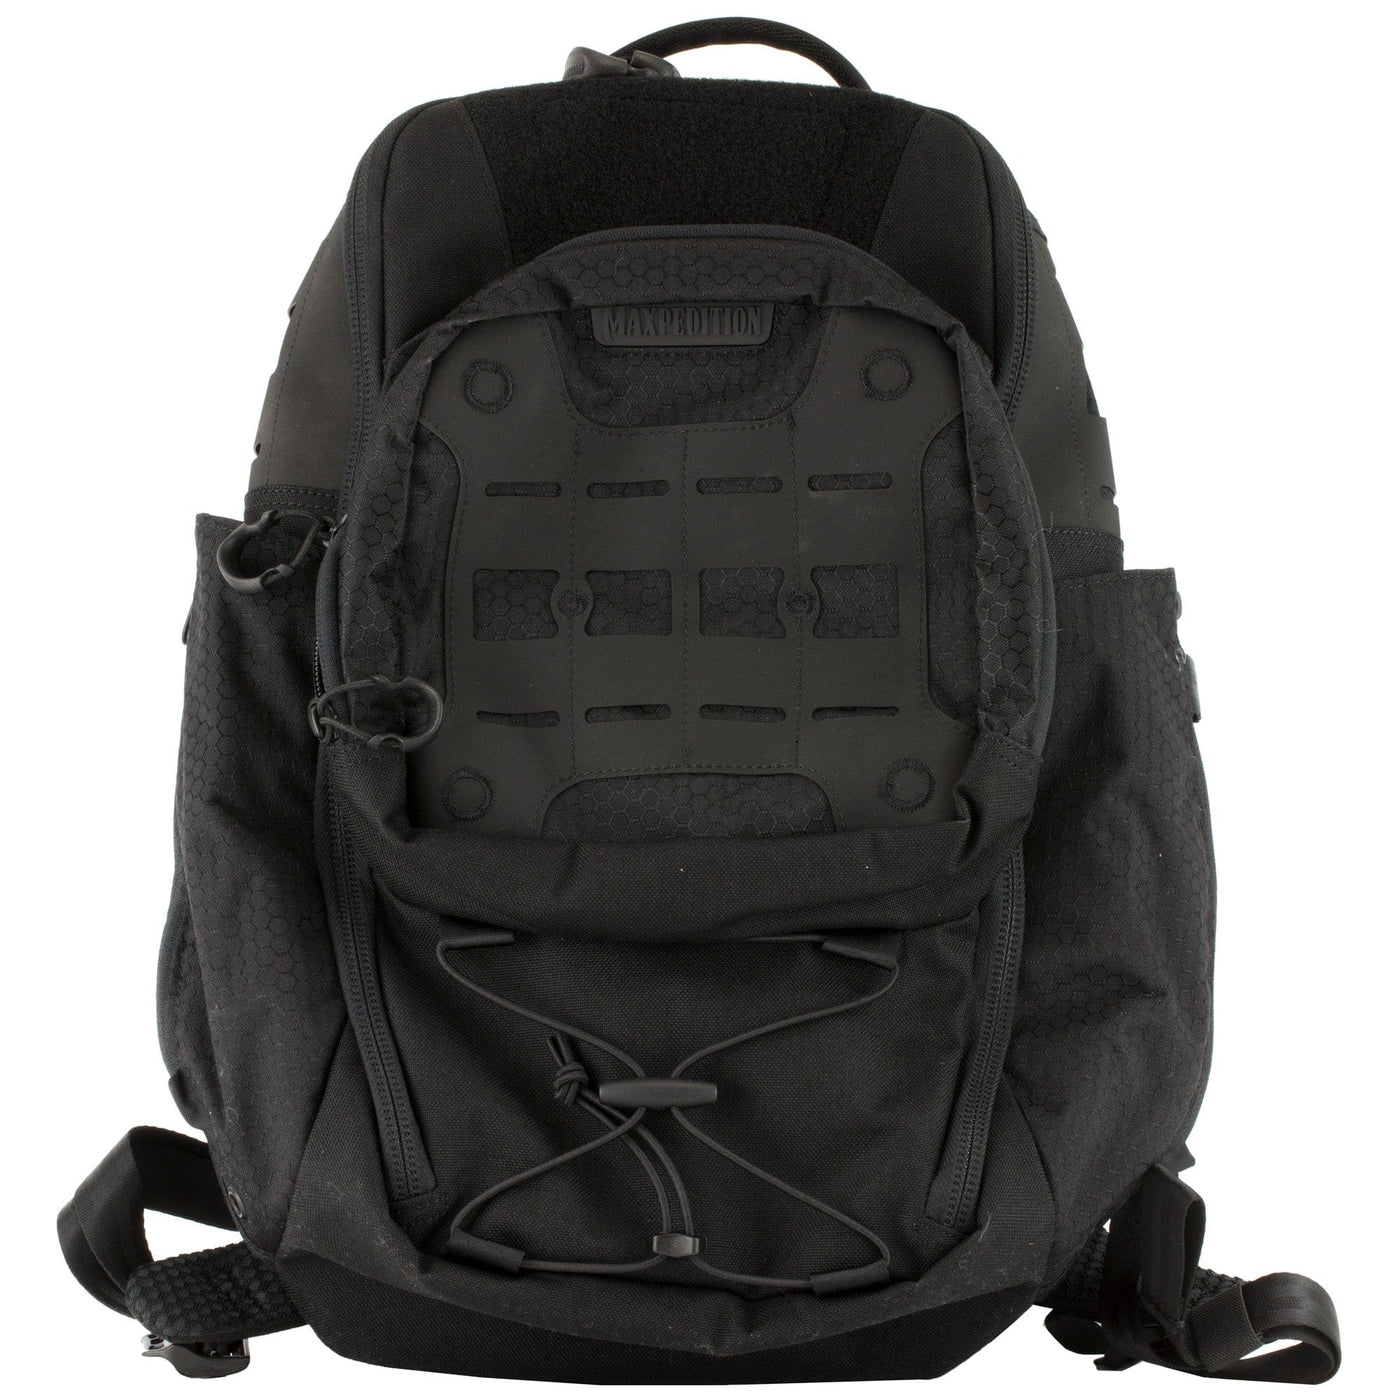 Maxpedition Maxpedition Lithvore Backpack Blk Soft Gun Cases